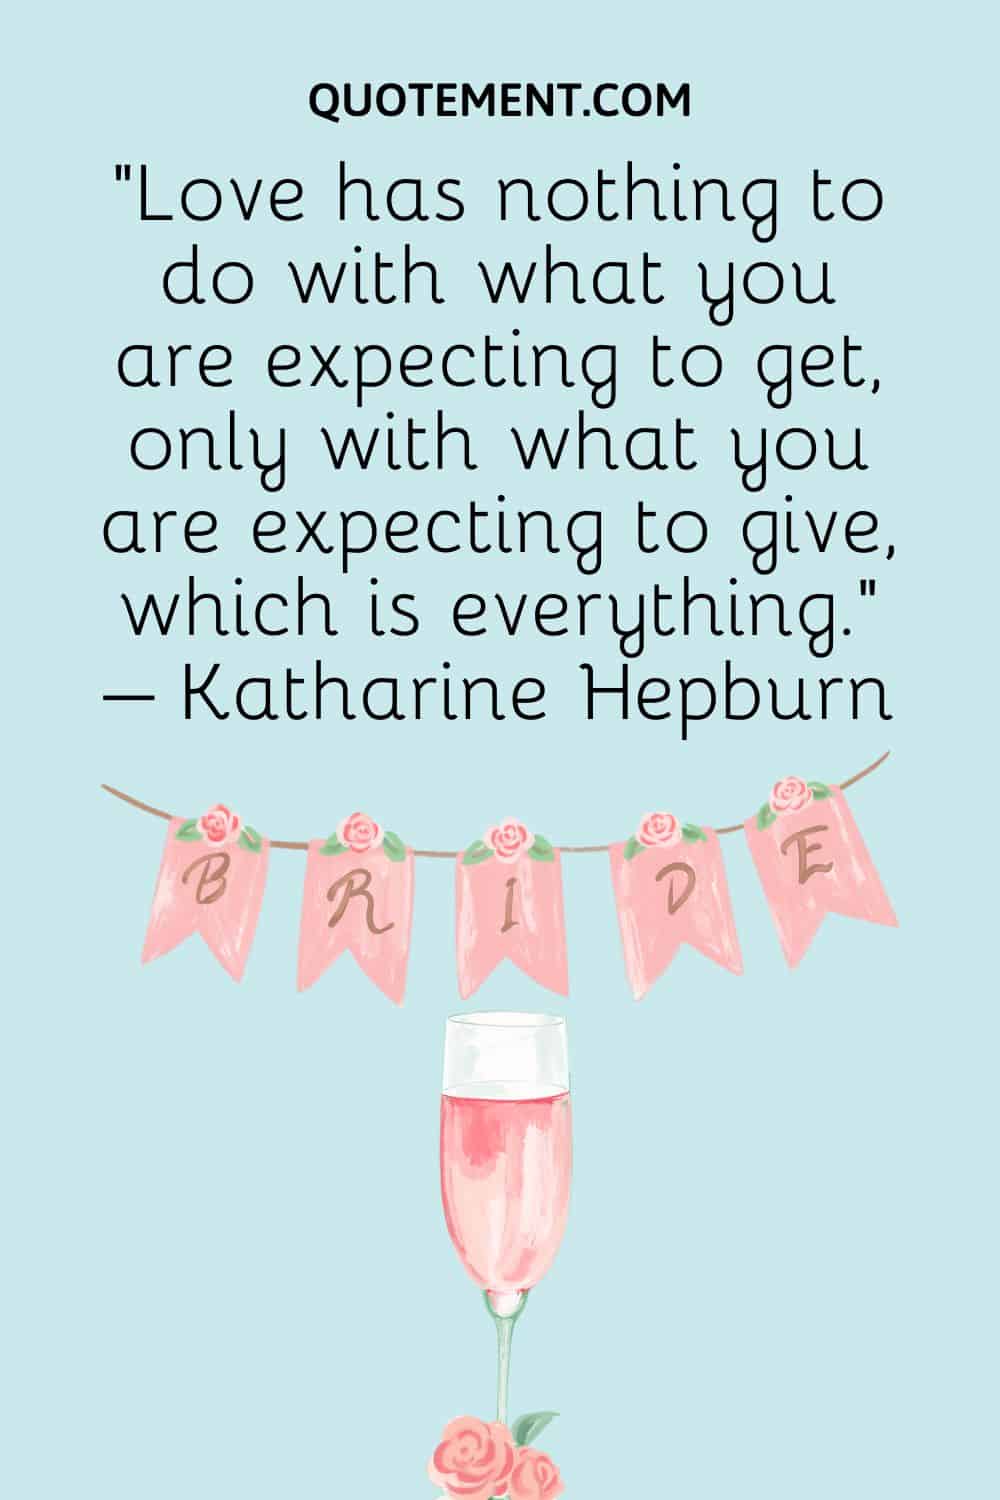 “Love has nothing to do with what you are expecting to get, only with what you are expecting to give, which is everything.” – Katharine Hepburn